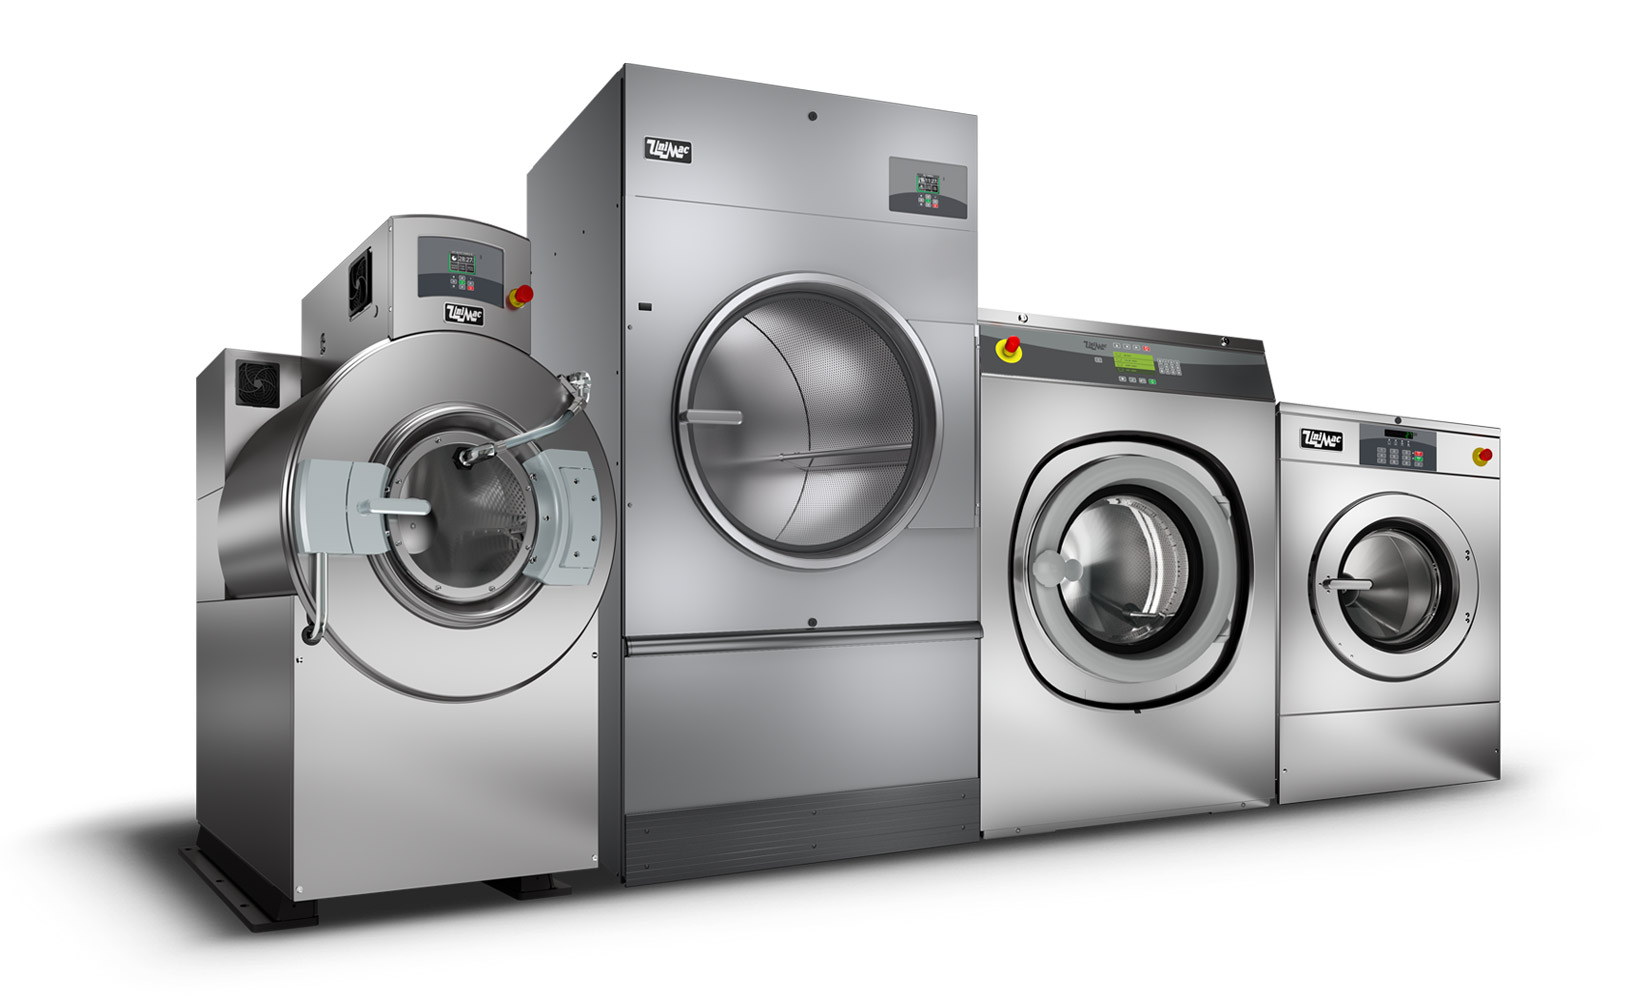 Commercial Laundry Equipment & Washing Machines  Commercial Washers,  Dryers - Consolidated Laundry Equipment Suppliers